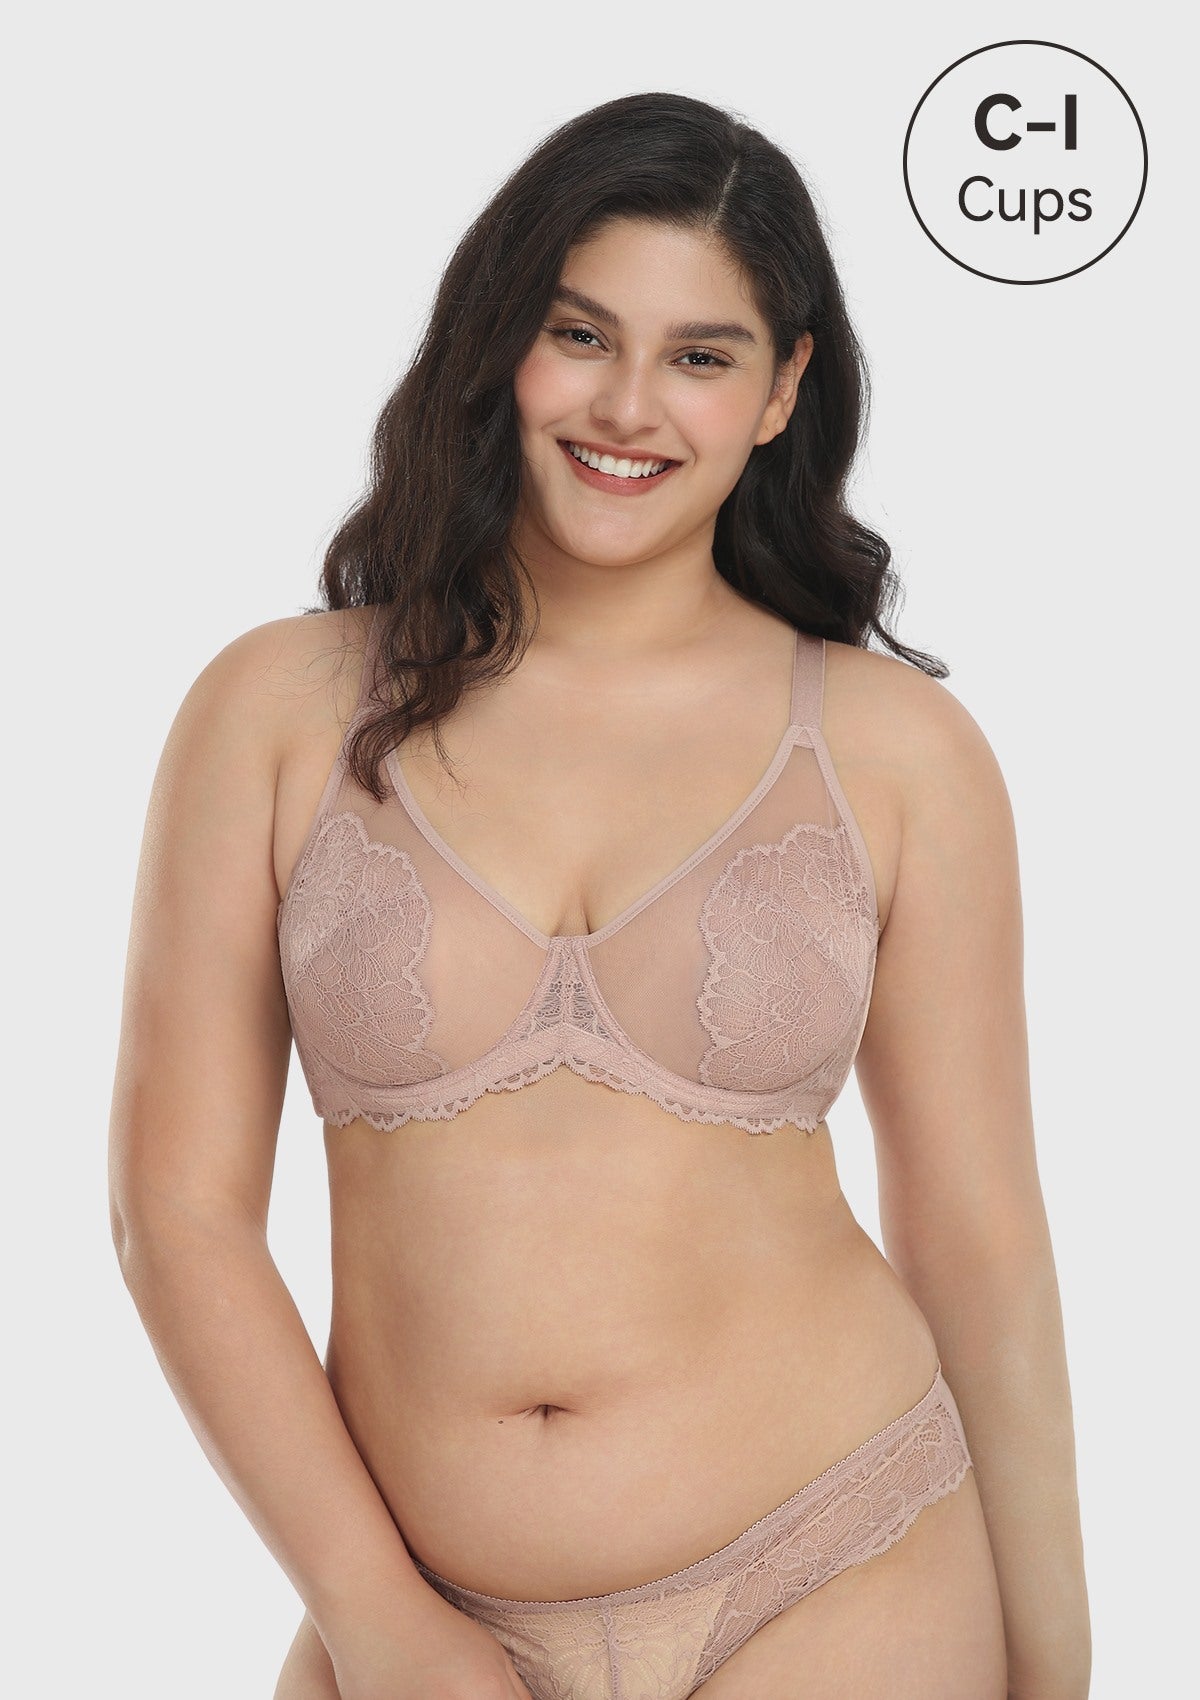 HSIA Blossom Plus Size Lace Bra - Wired, Unpadded, See-Through - Dark Pink / 38 / D